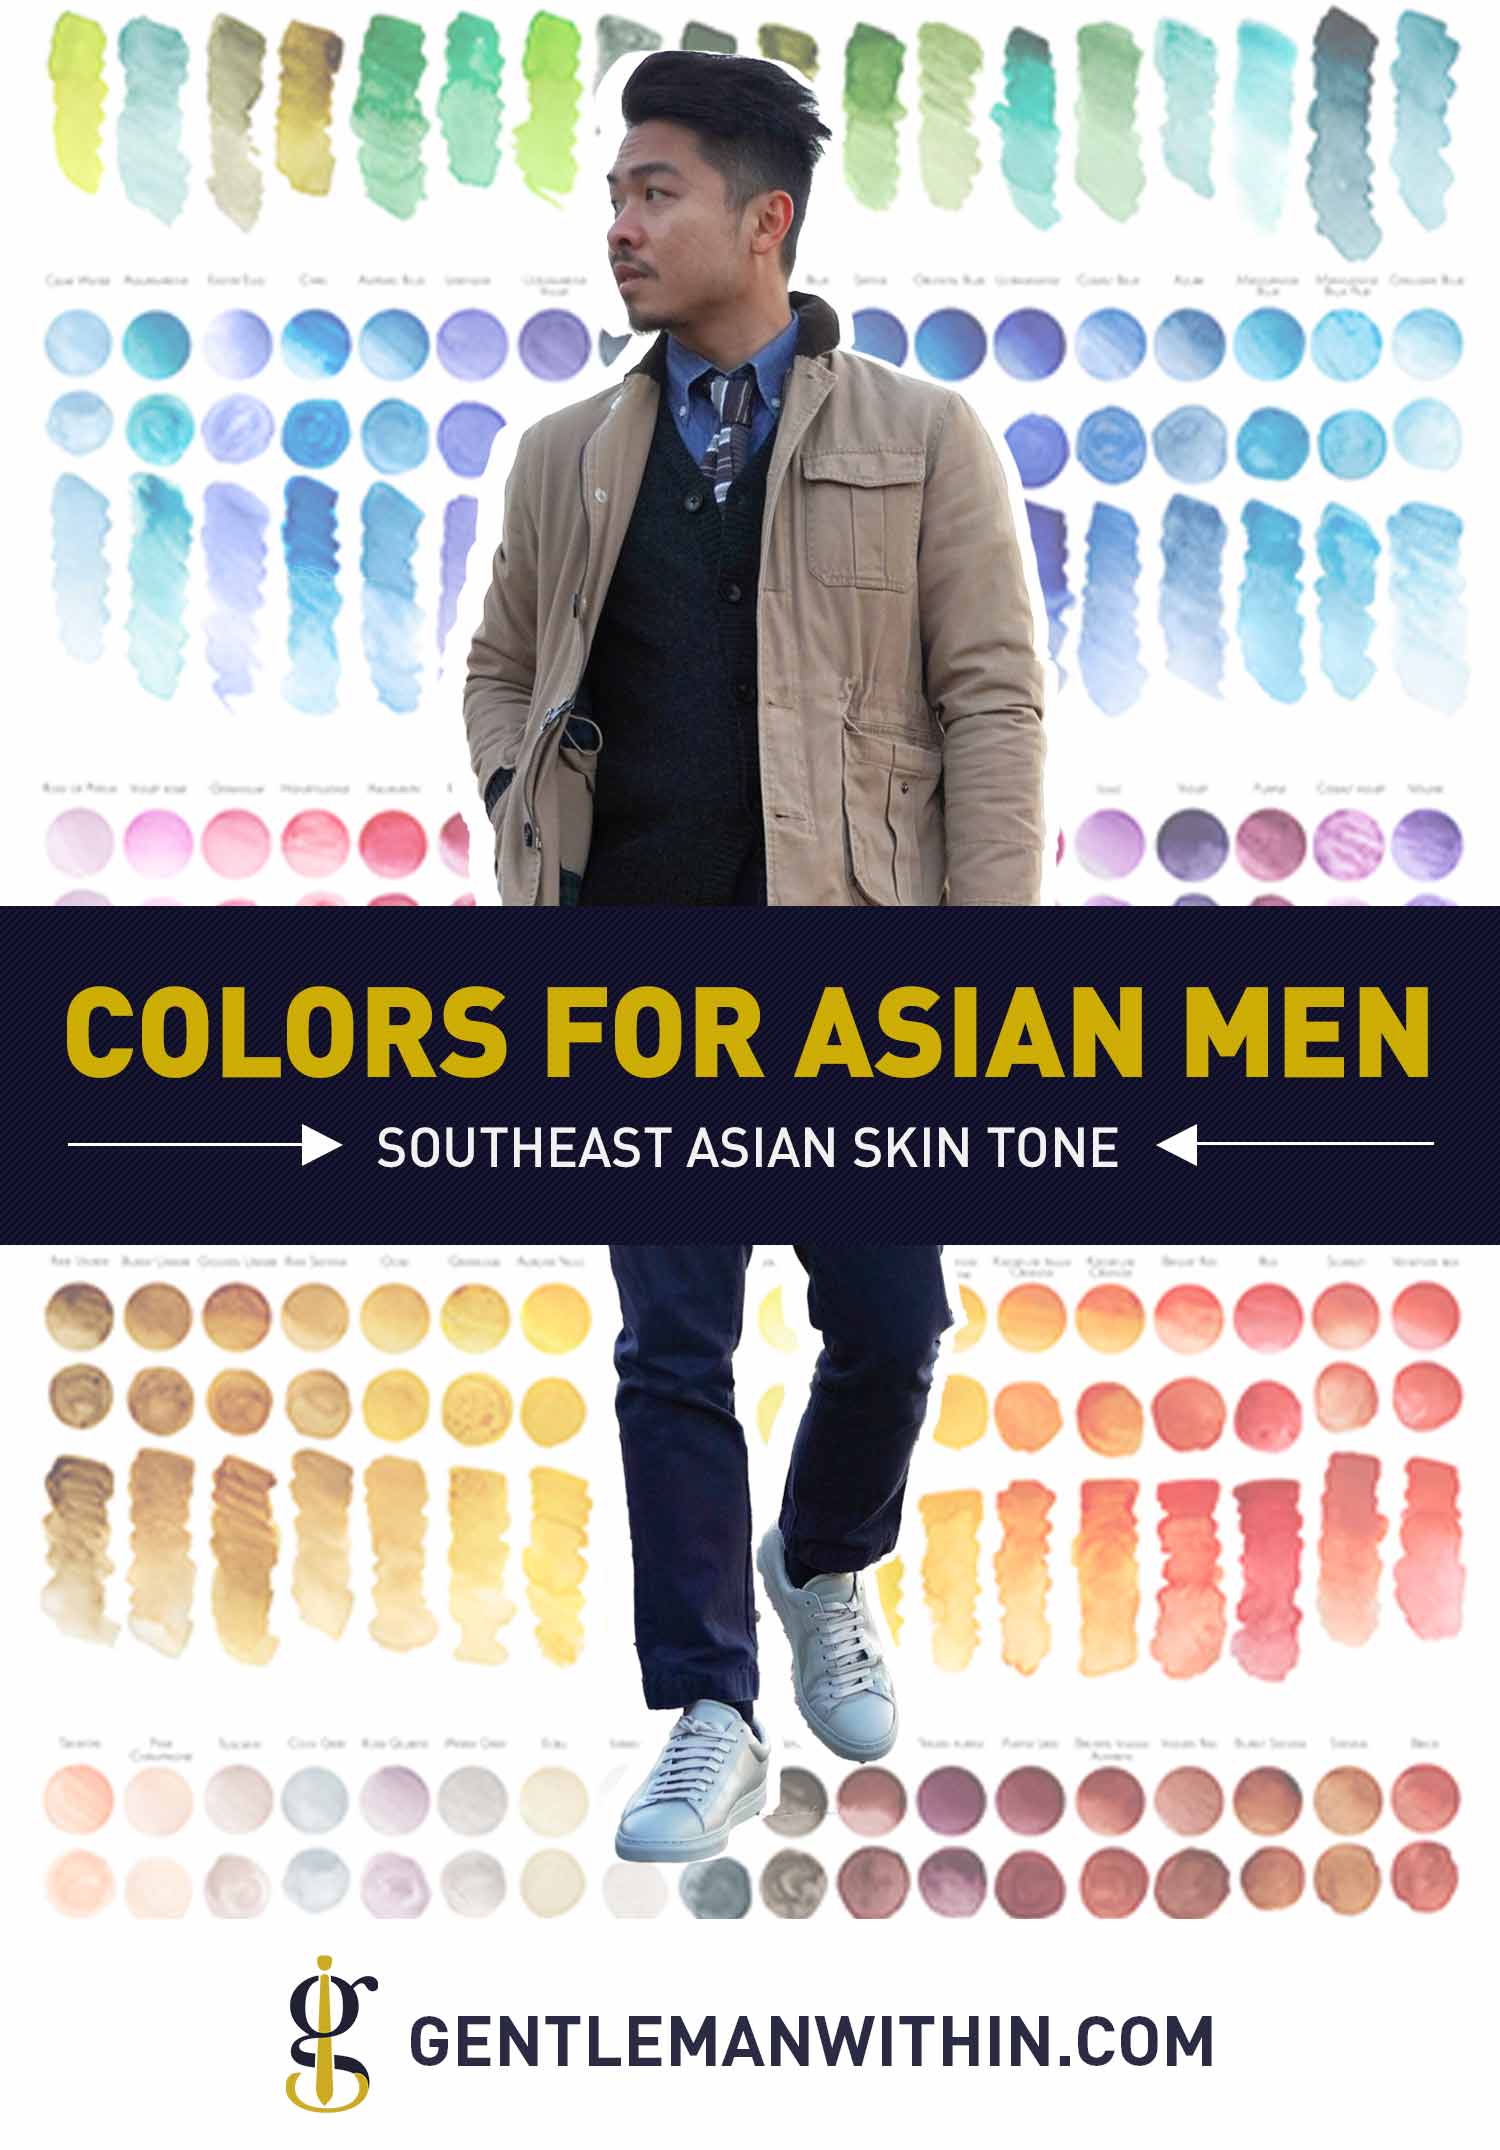 10 Best Colors to Wear for Southeast Asian Men (and what to avoid) | GENTLEMAN WITHIN